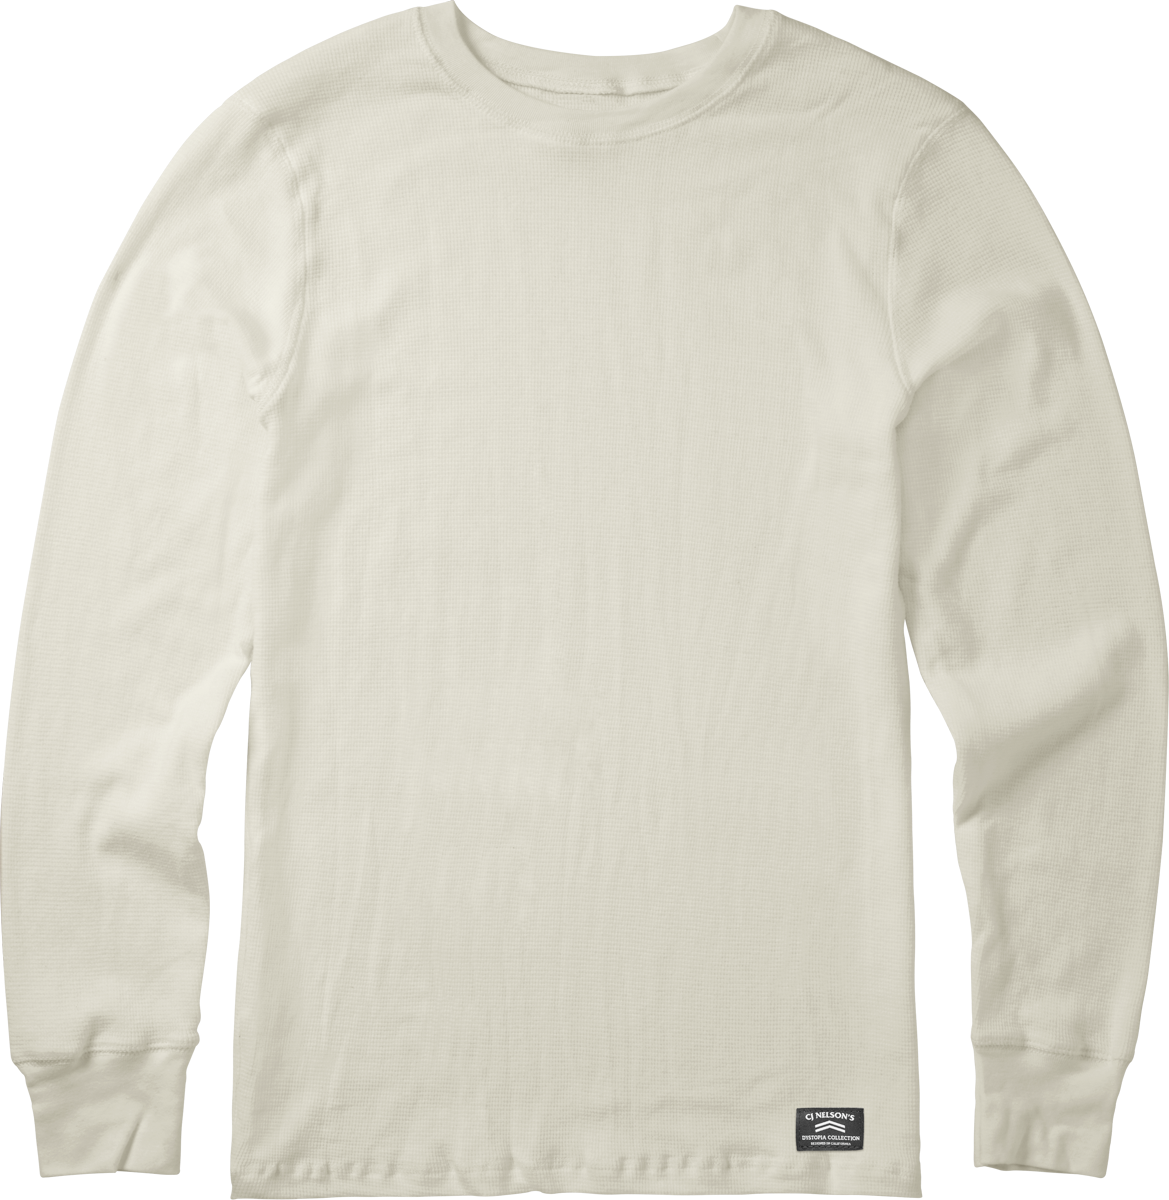 DYSTOPIA L/S THERMAL